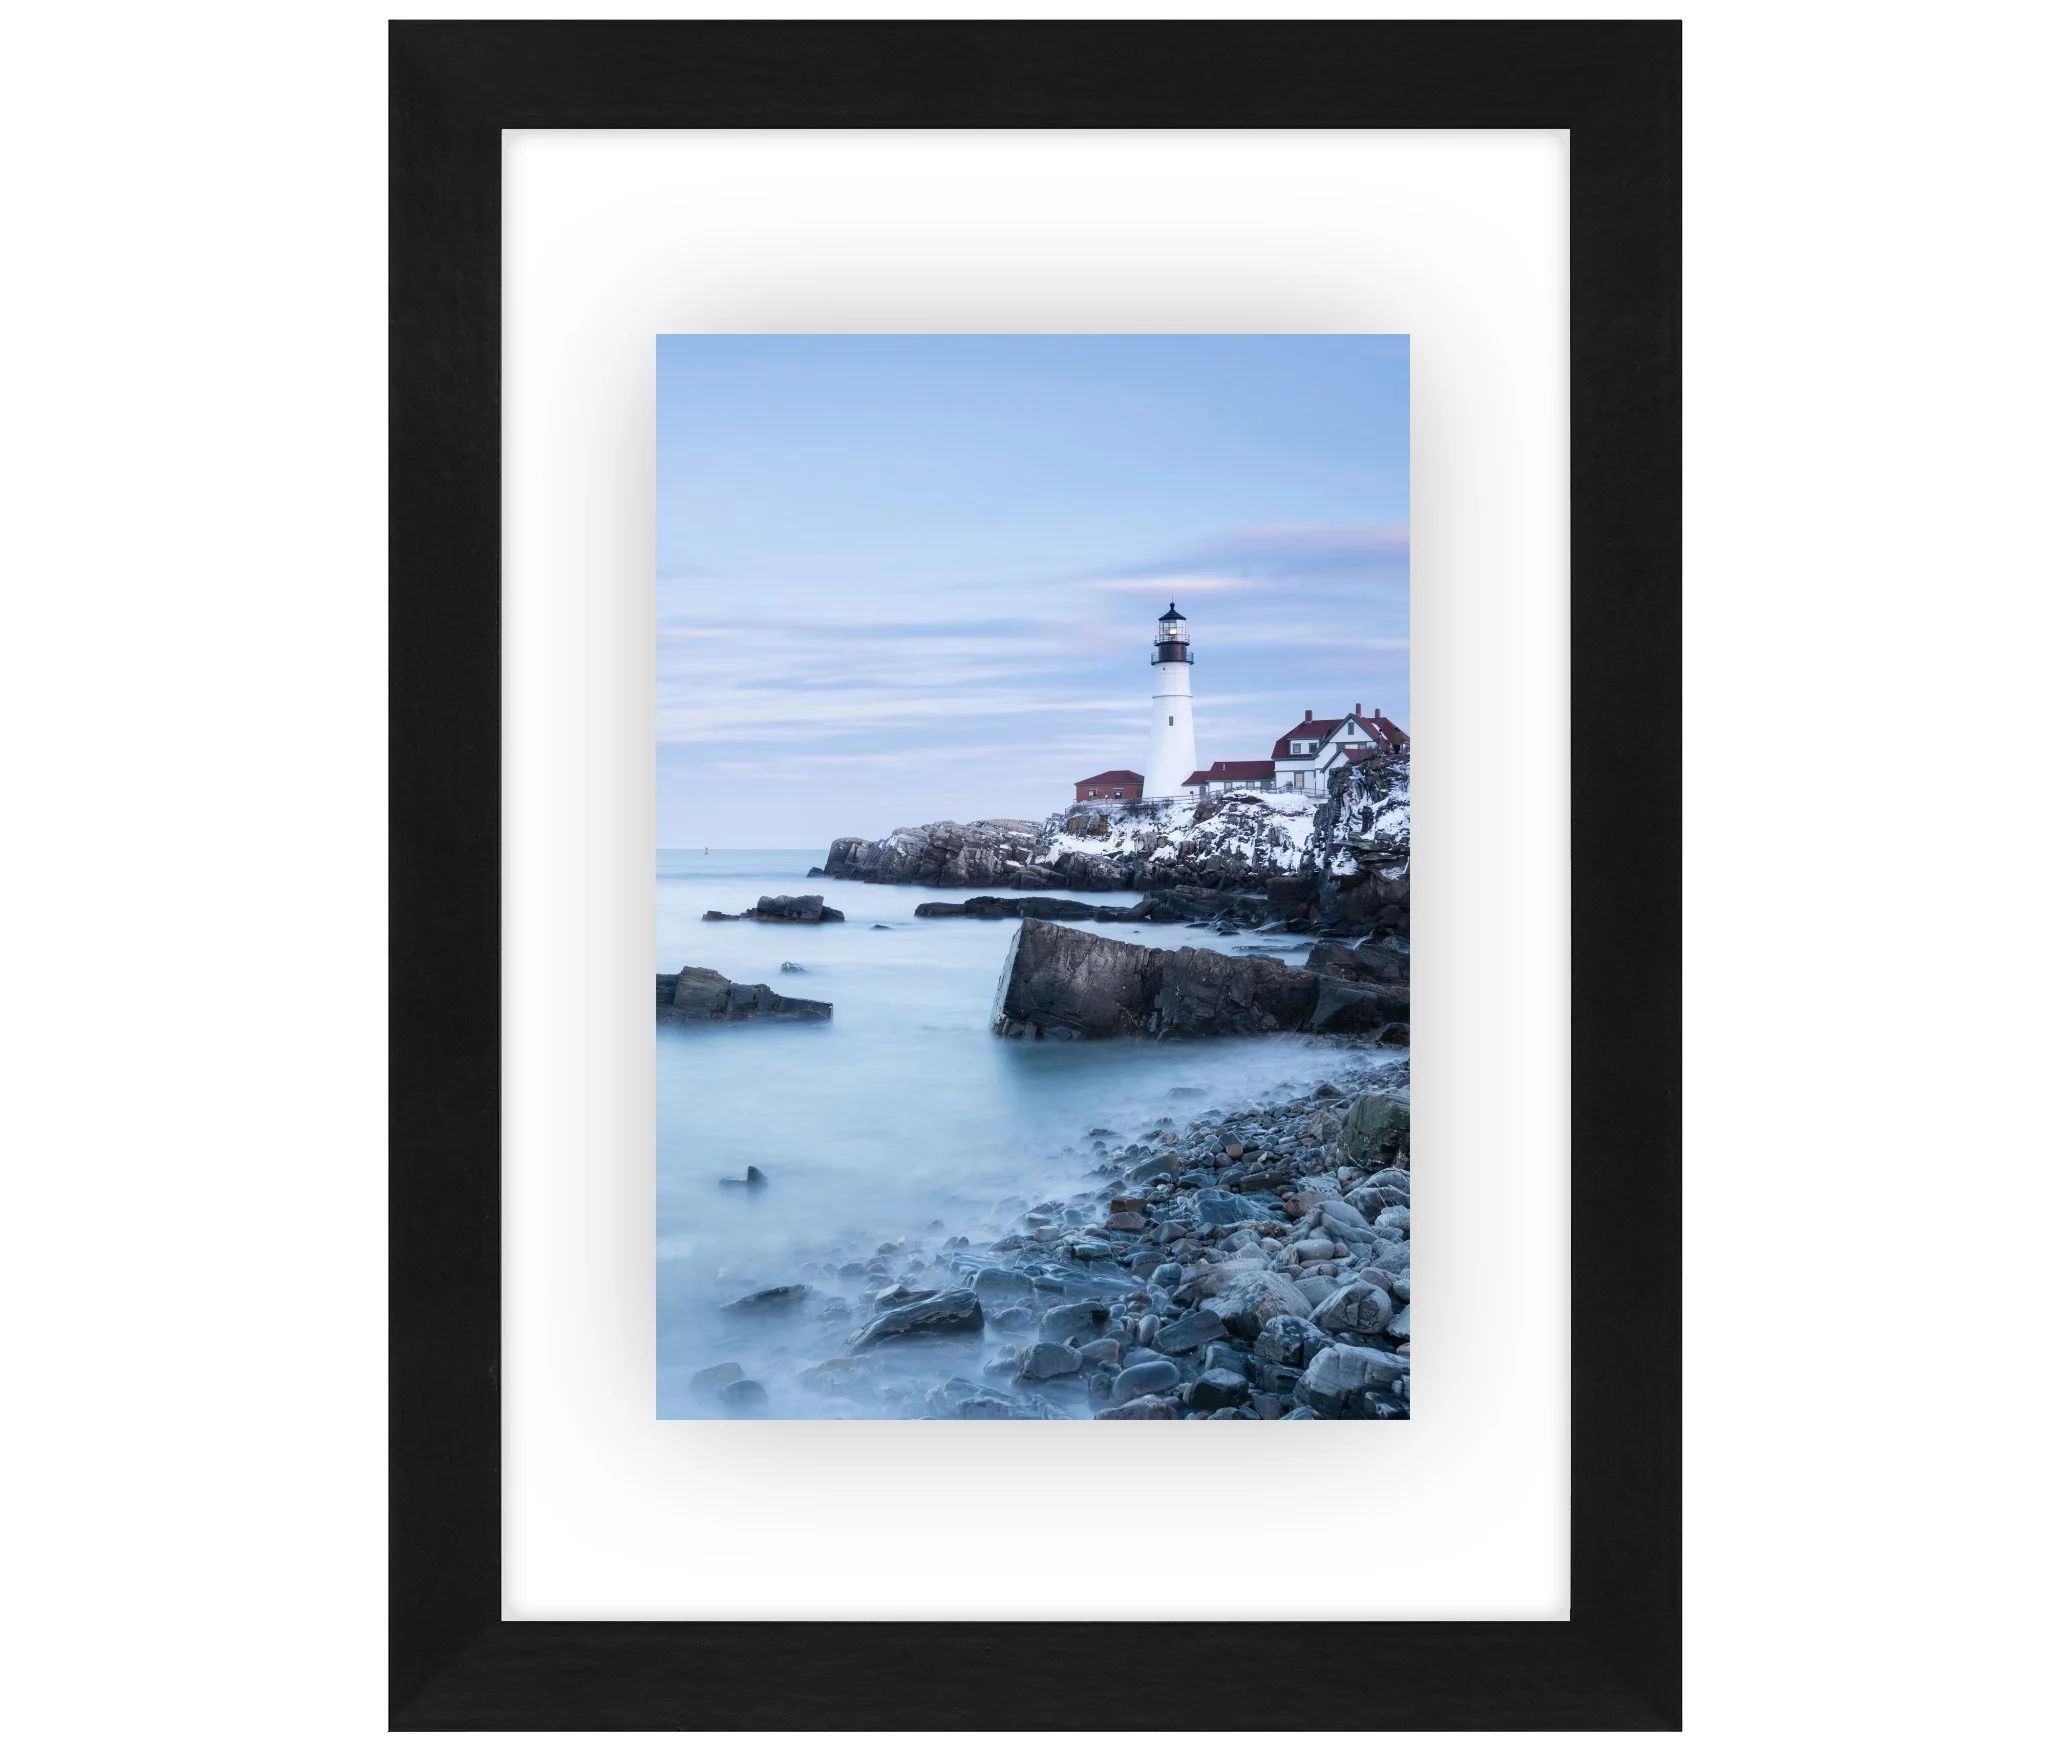 Americanflat 8x10 Floating Frame in Black with Polished Glass - Use Any Size Photo up to 8x10 for... | Walmart (US)